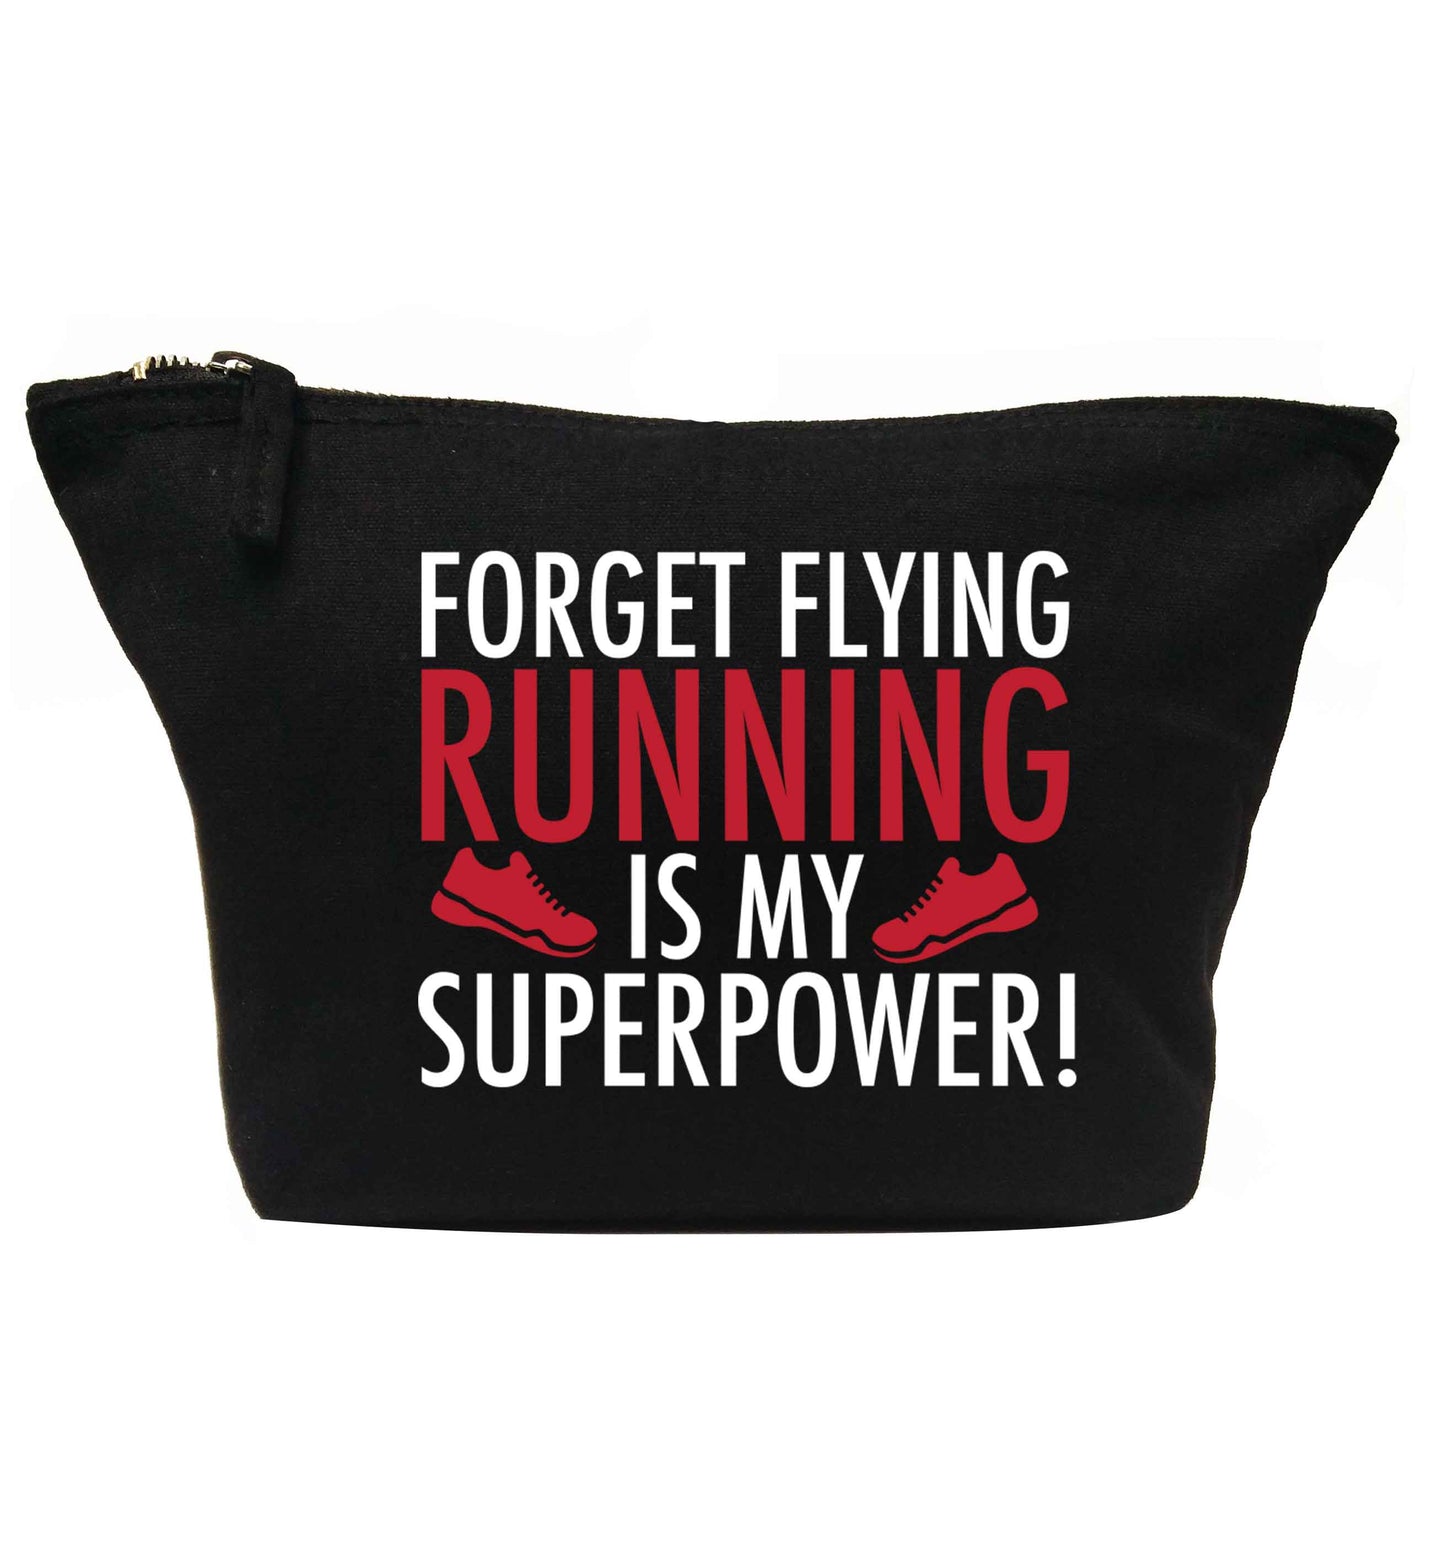 Forget flying running is my superpower | Makeup / wash bag